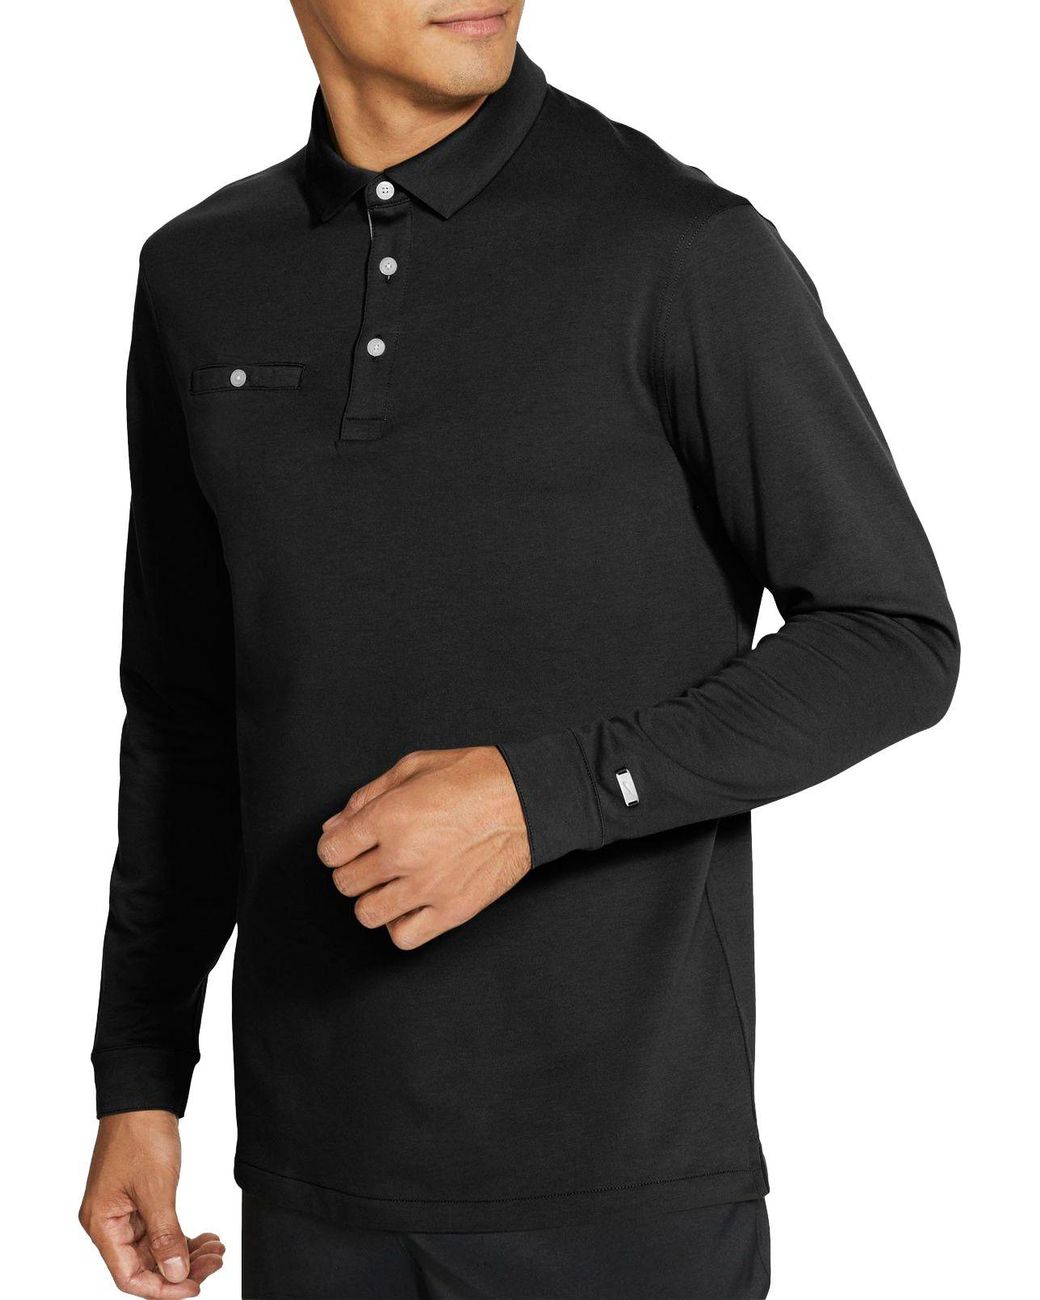 Nike Dri-fit Player Long Sleeve Golf Polo in Black for Men - Lyst